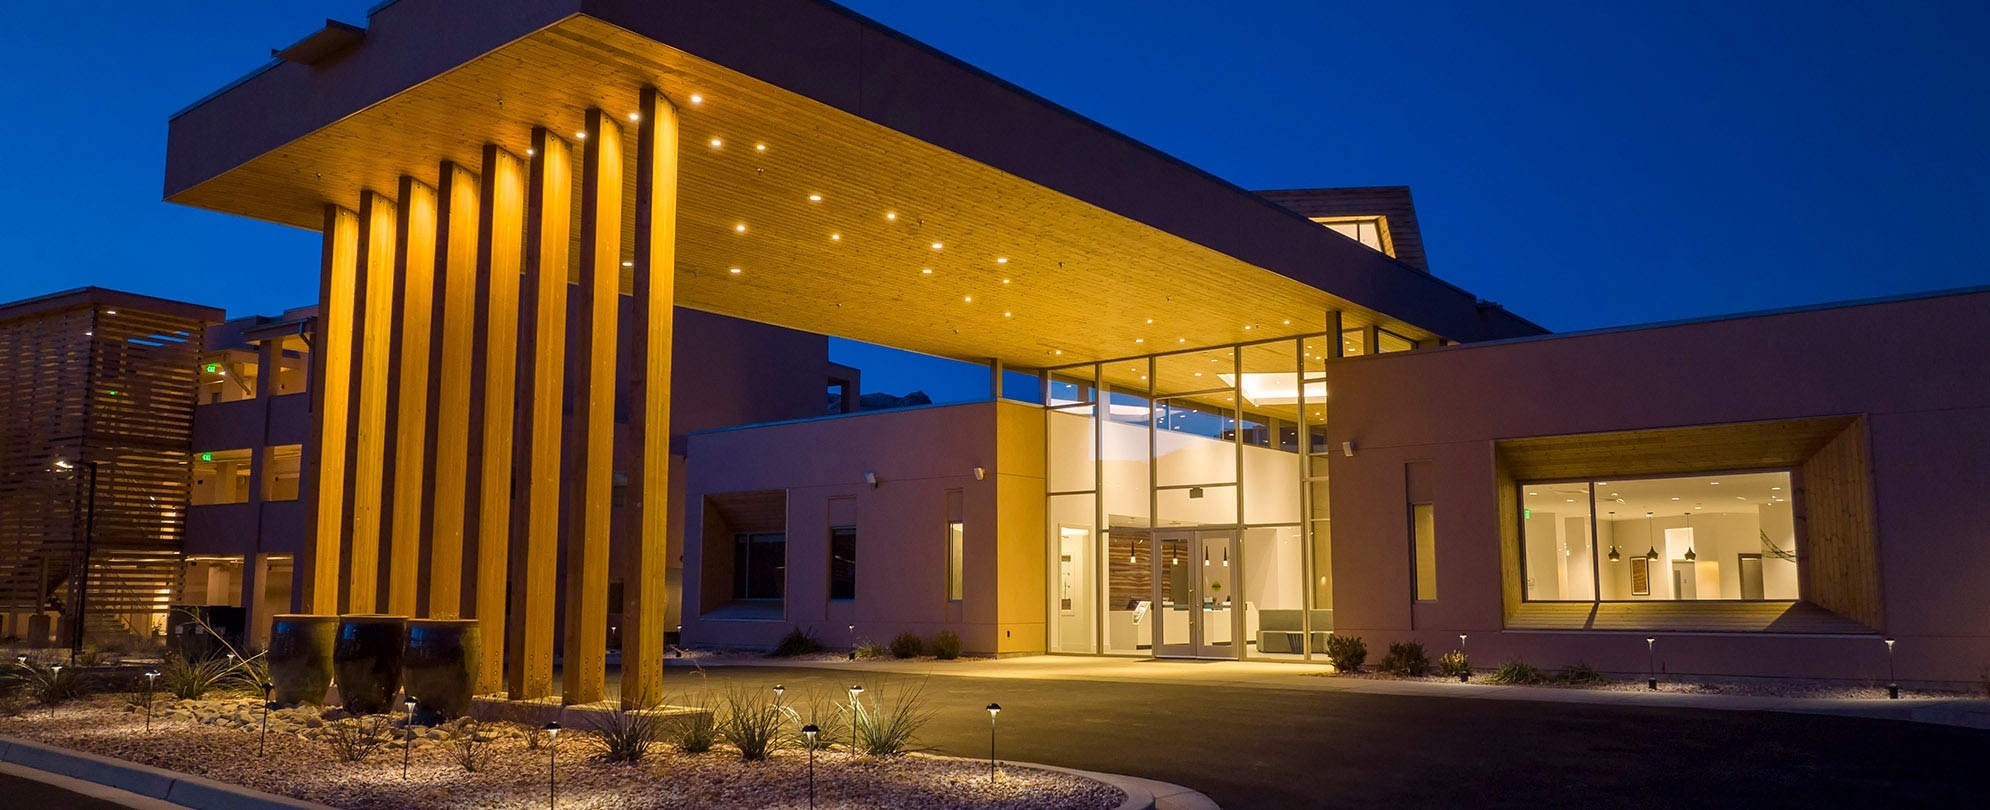 The exterior entrance to WorldMark Moab with bright lights at night.